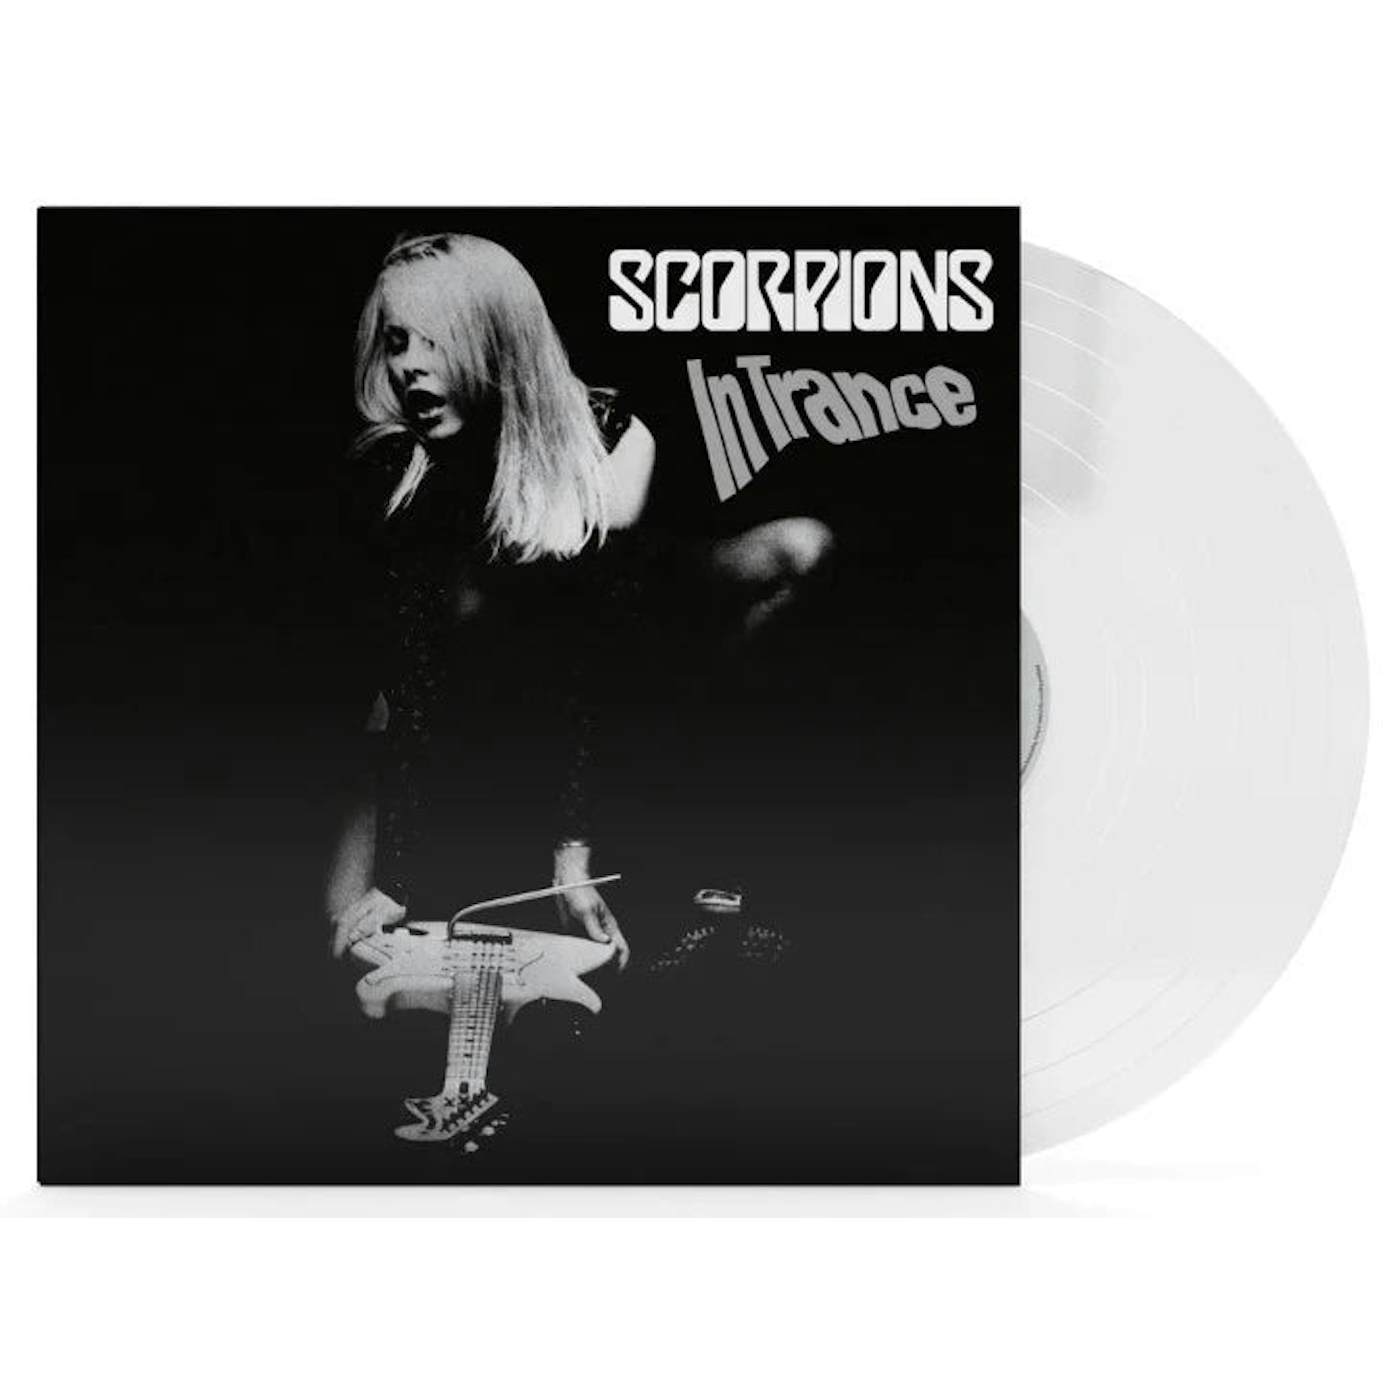 Scorpions - In Trance Limited Edition (Vinyl)